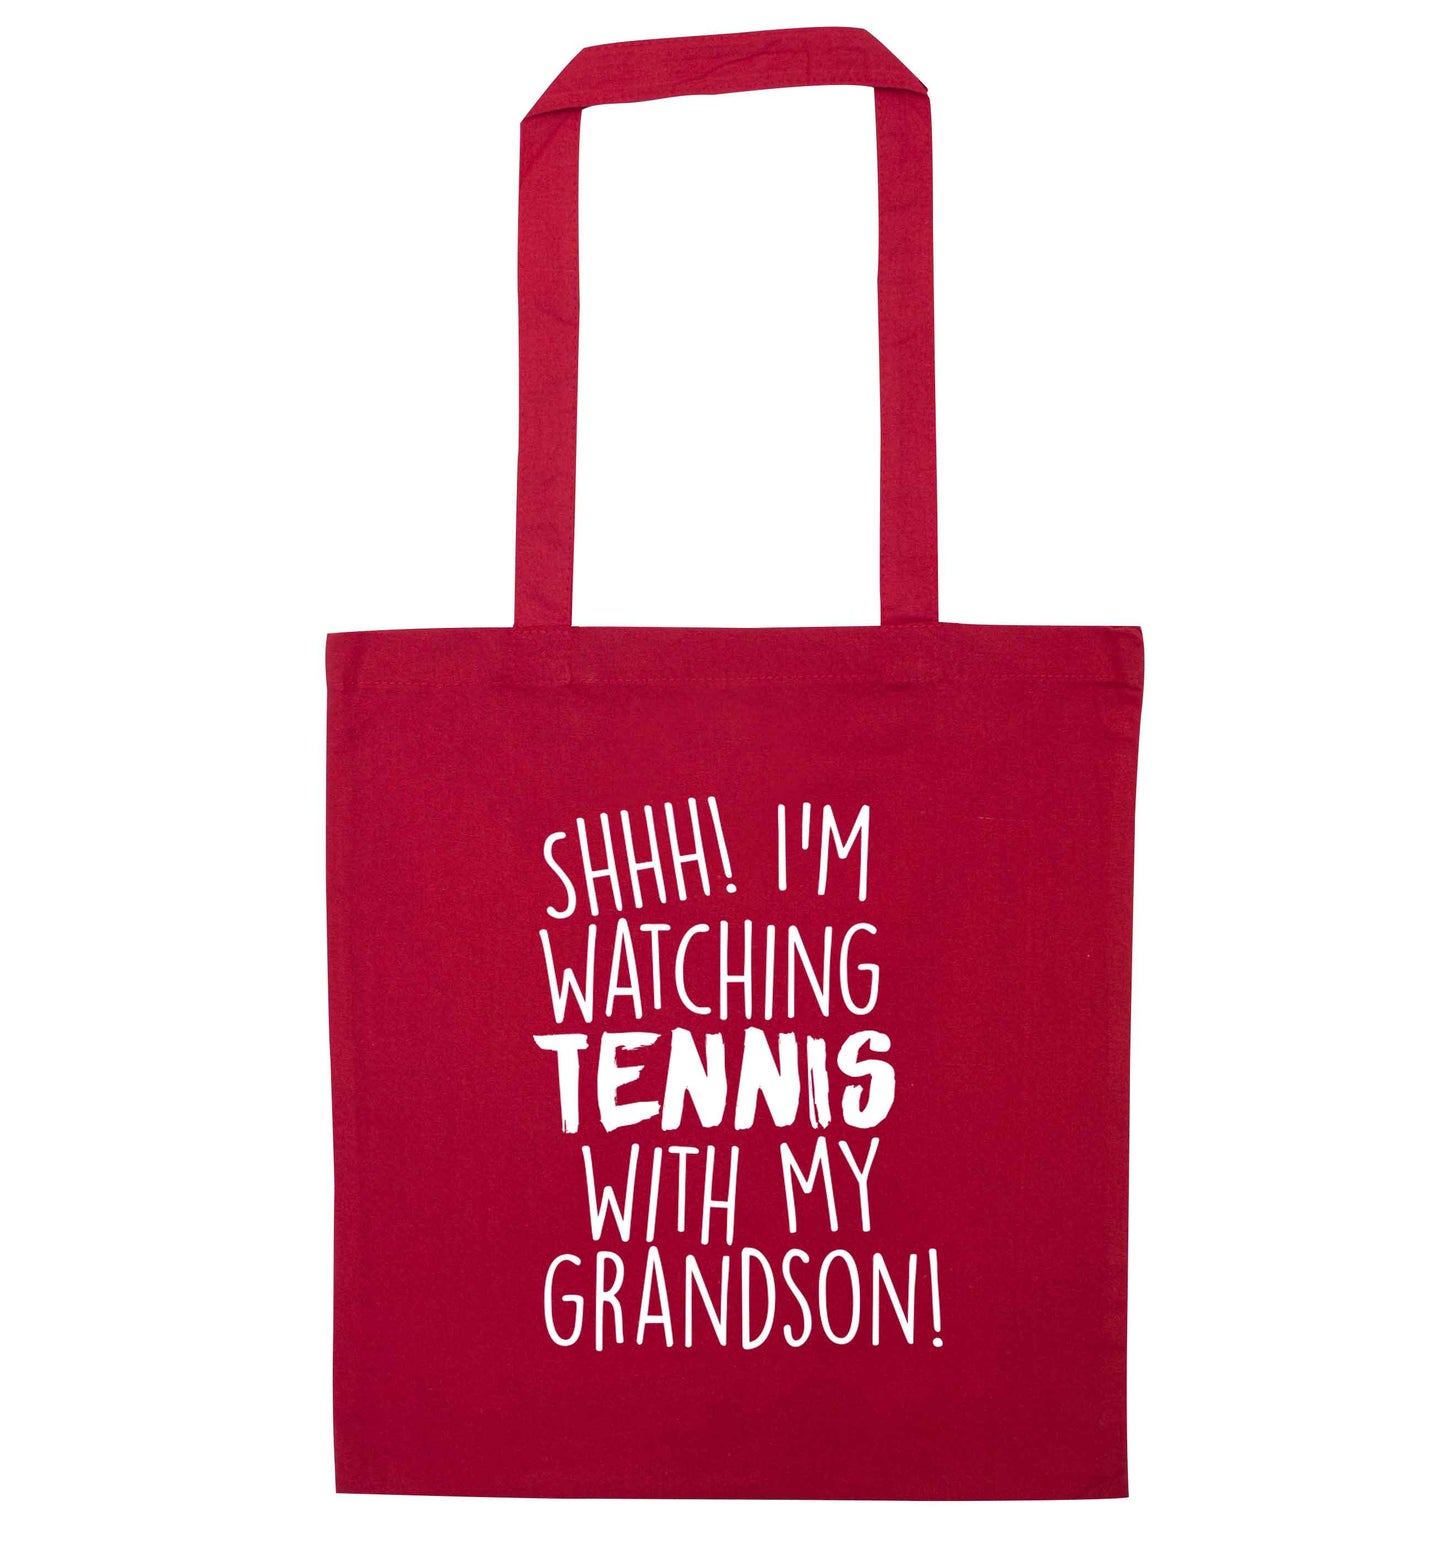 Shh! I'm watching tennis with my grandson! red tote bag